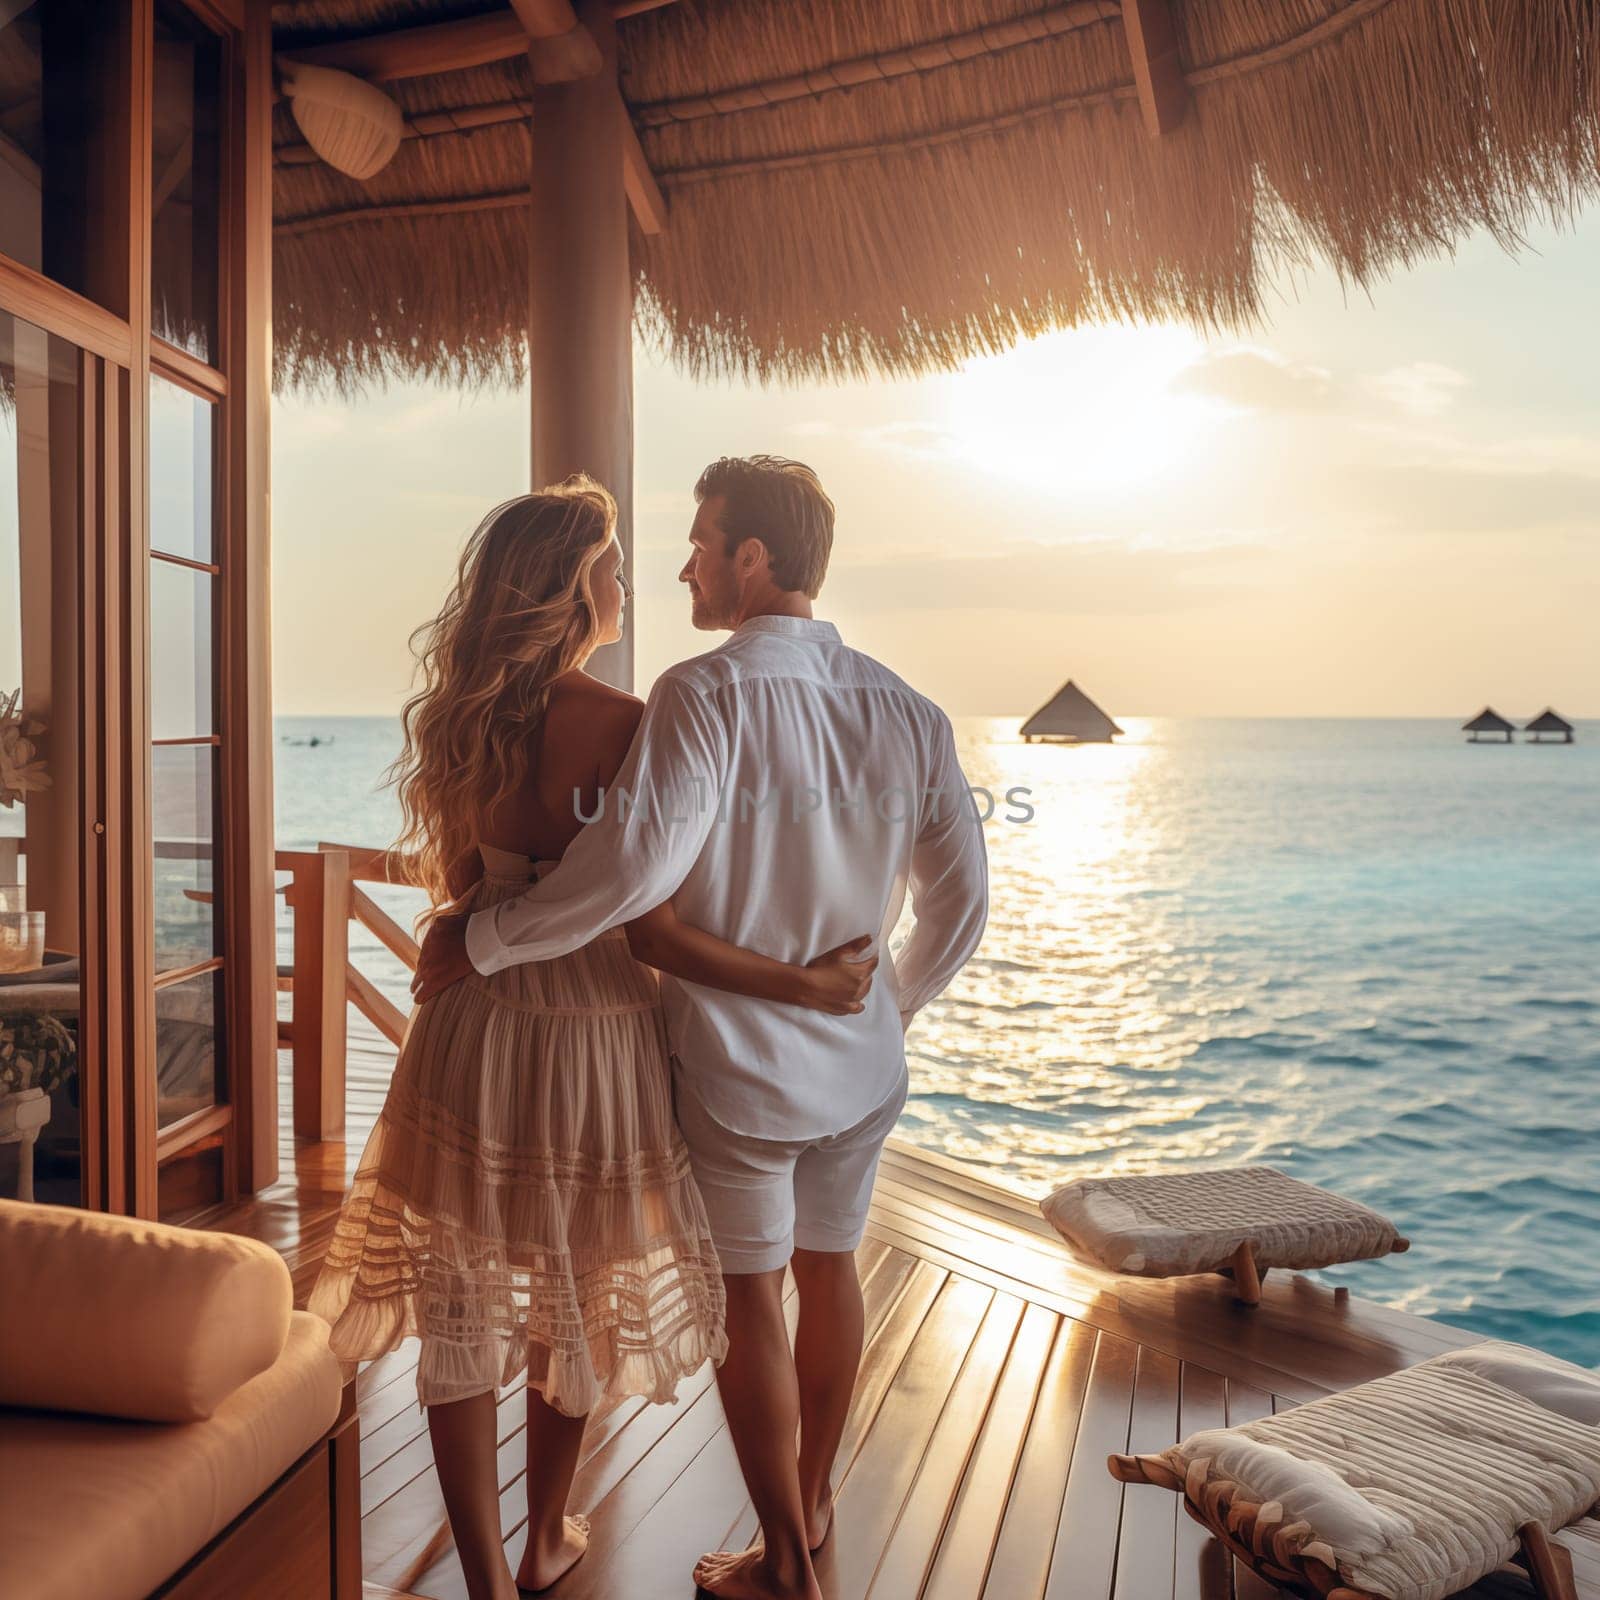 A man and a woman are peacefully standing on a deck, embracing each other while gazing out at the vast ocean before them, enjoying a serene moment together.